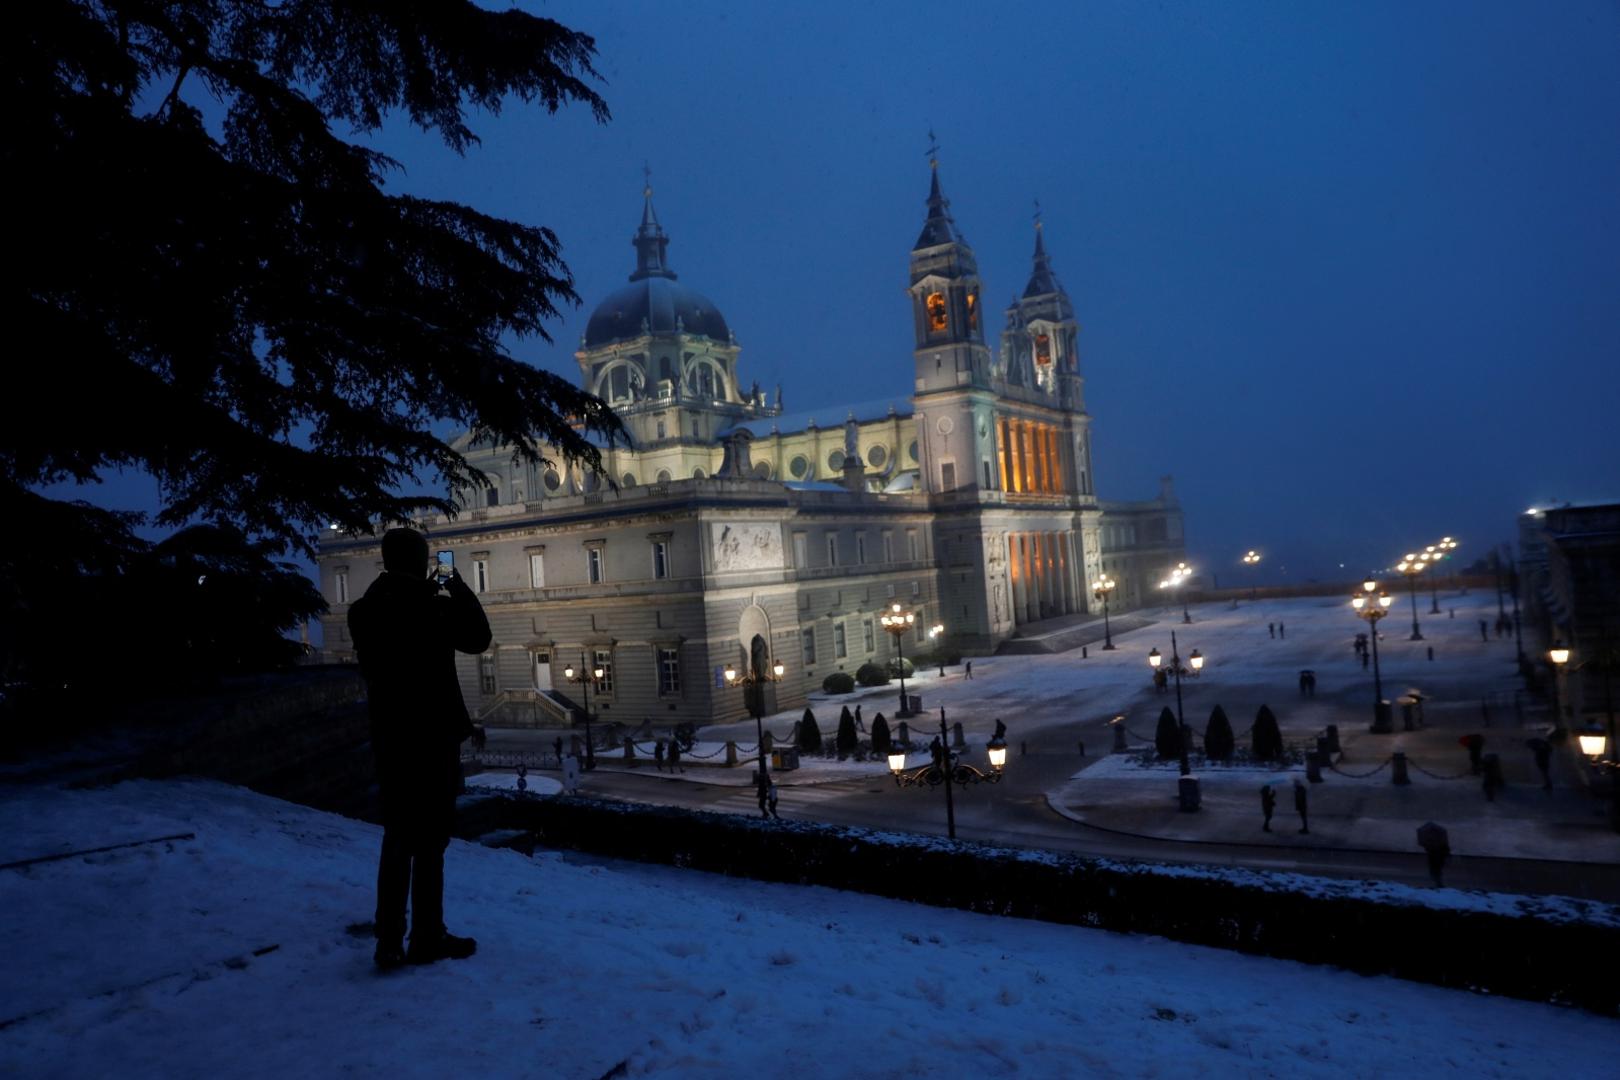 Heavy snowfall in Madrid A man takes a picture of Almudena Cathedral during heavy snowfall in Madrid, Spain January 8, 2021. REUTERS/Susana Vera SUSANA VERA